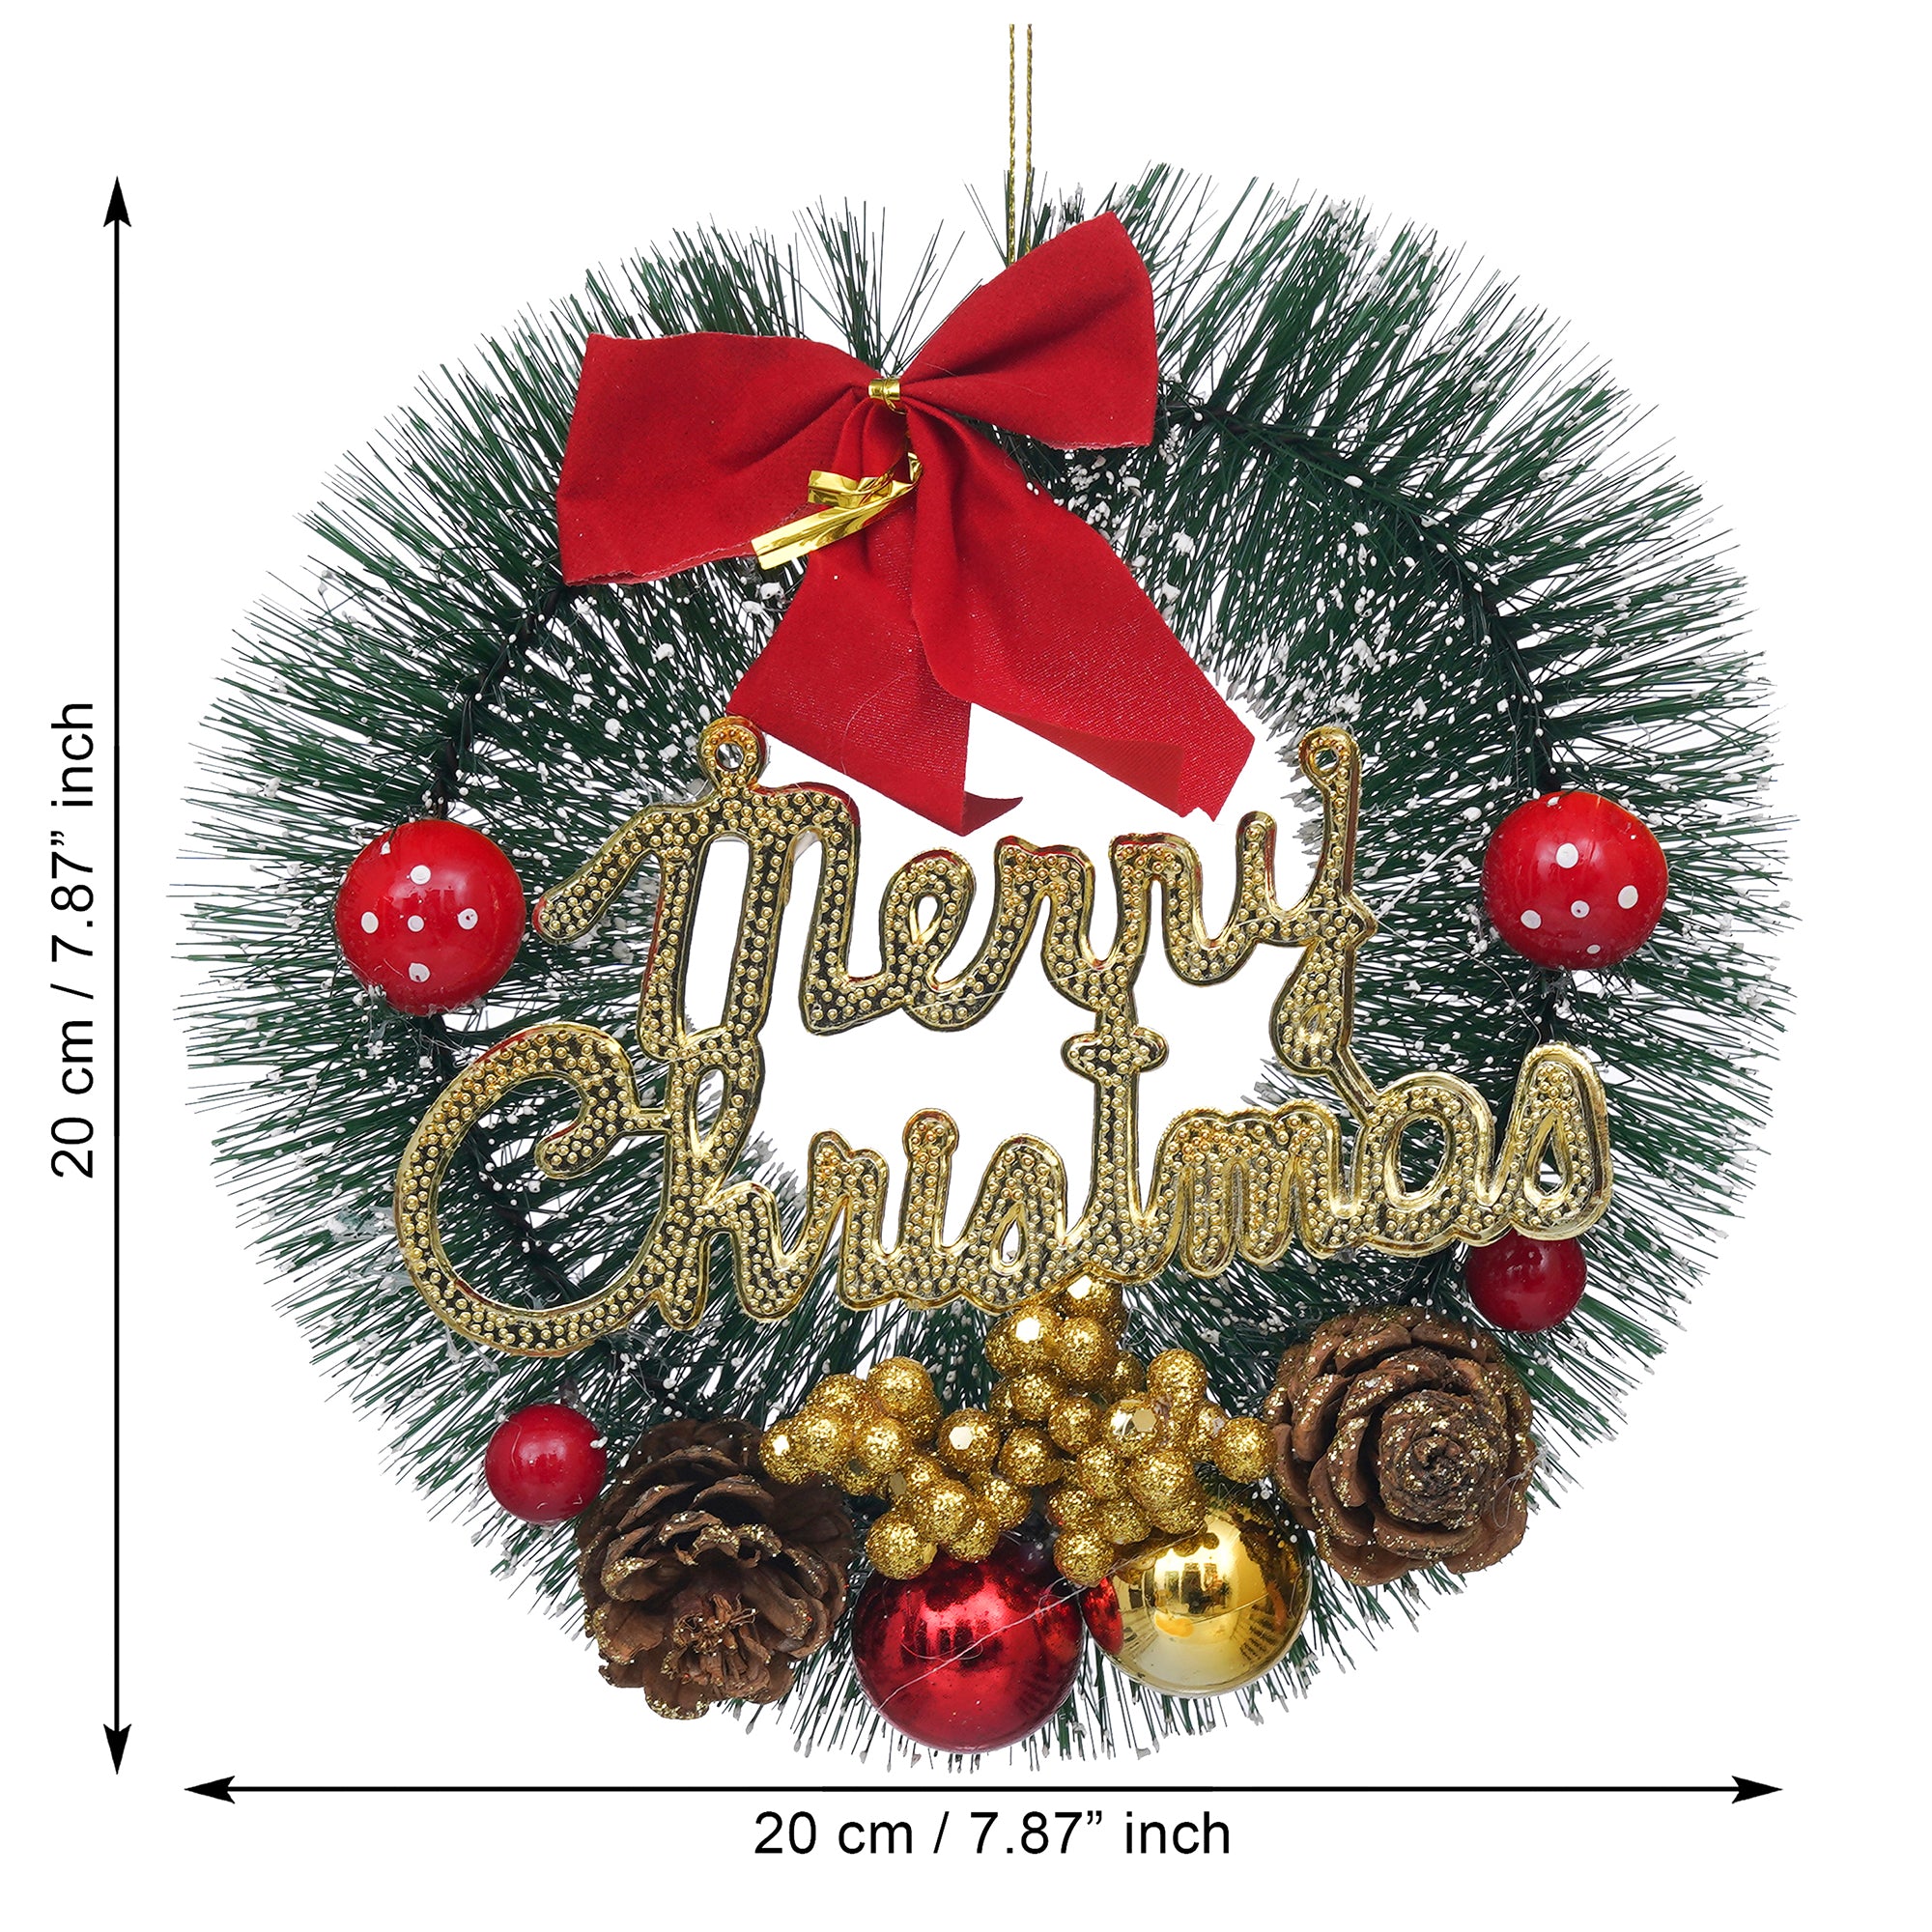 eCraftIndia Merry Christmas Wreath With Berries, Balls, Flowers, Ribbon  Christmas Front Door Ornament and Wall Decoration  Artificial Pine Garland for Xmas Party Decor 3